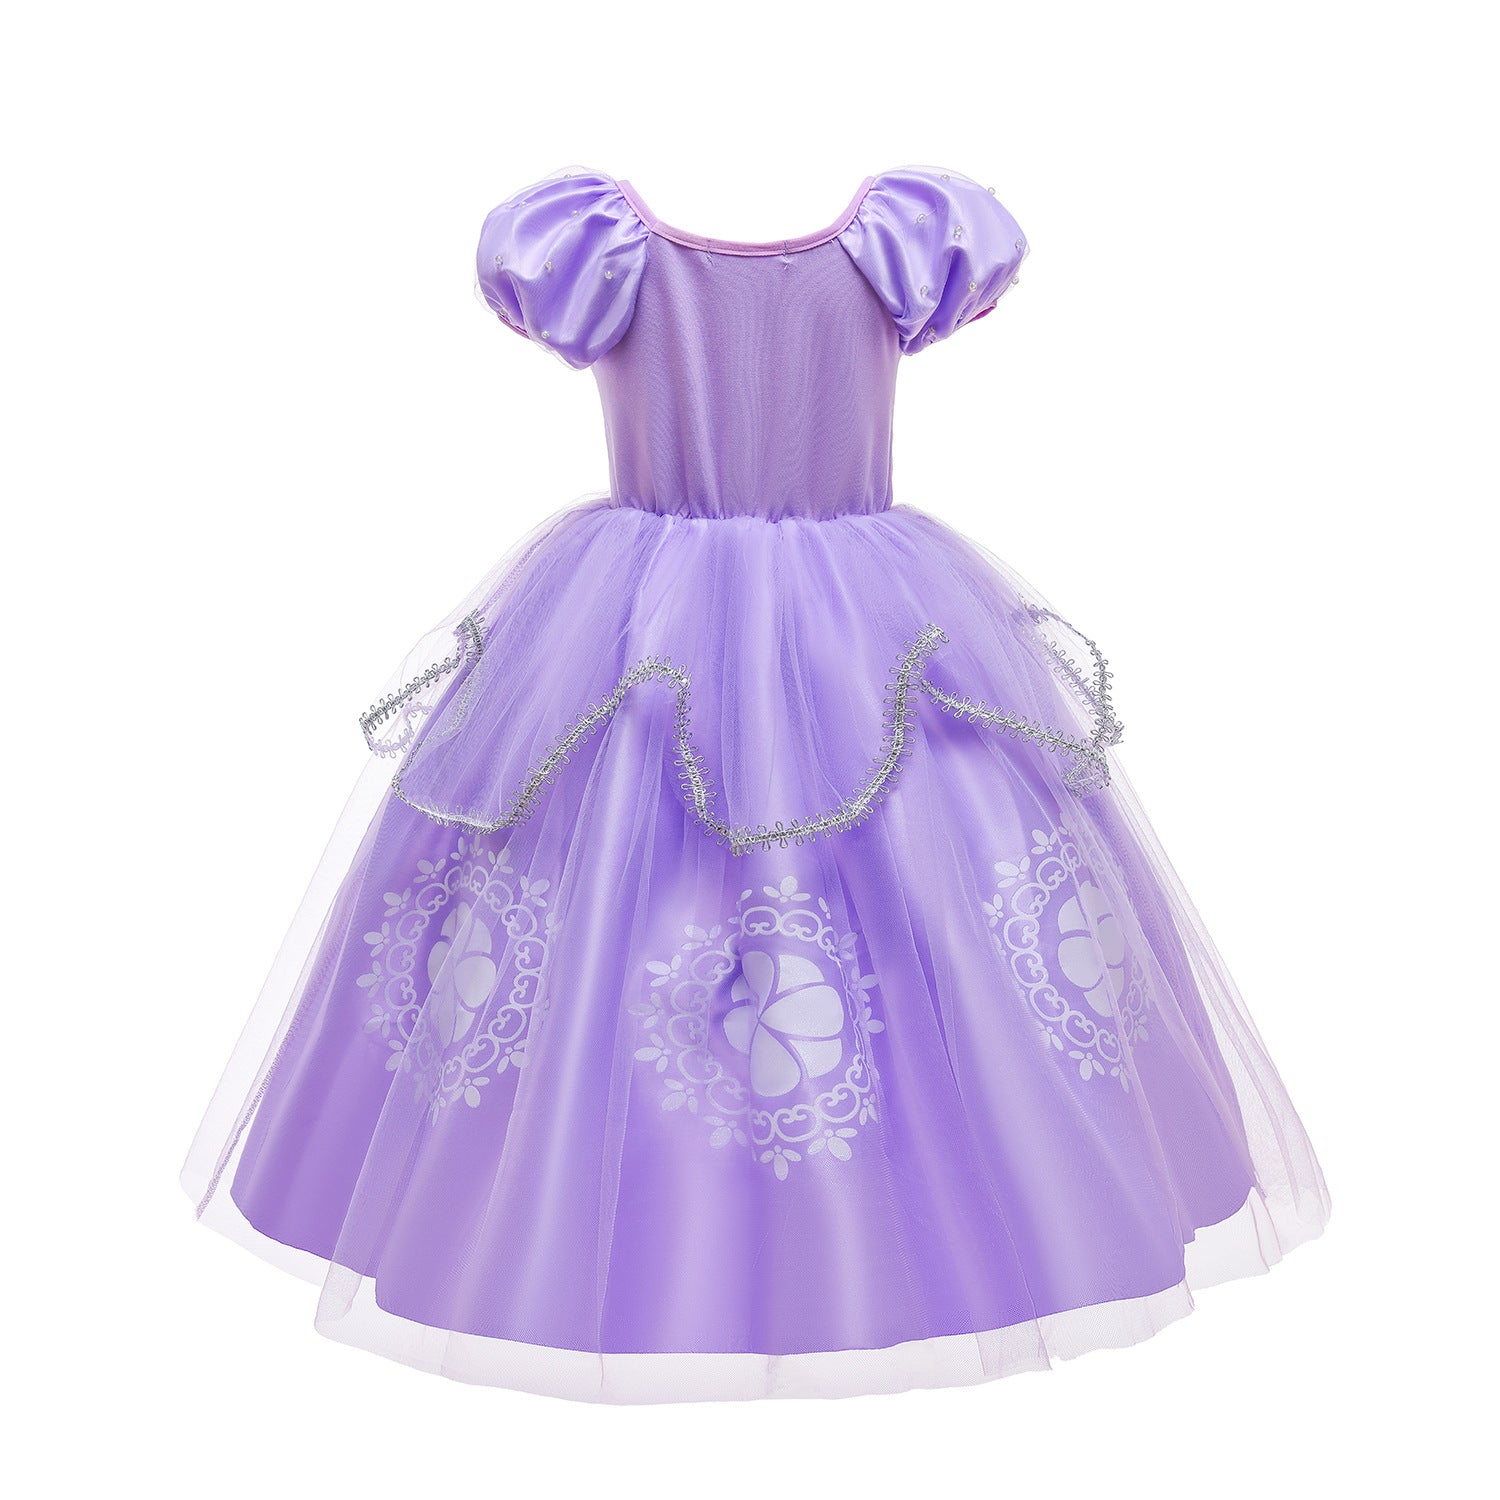 Flower Girls Dresses New Princess Sofia Costume Dresses For Cosplay Party Holiday Wedding